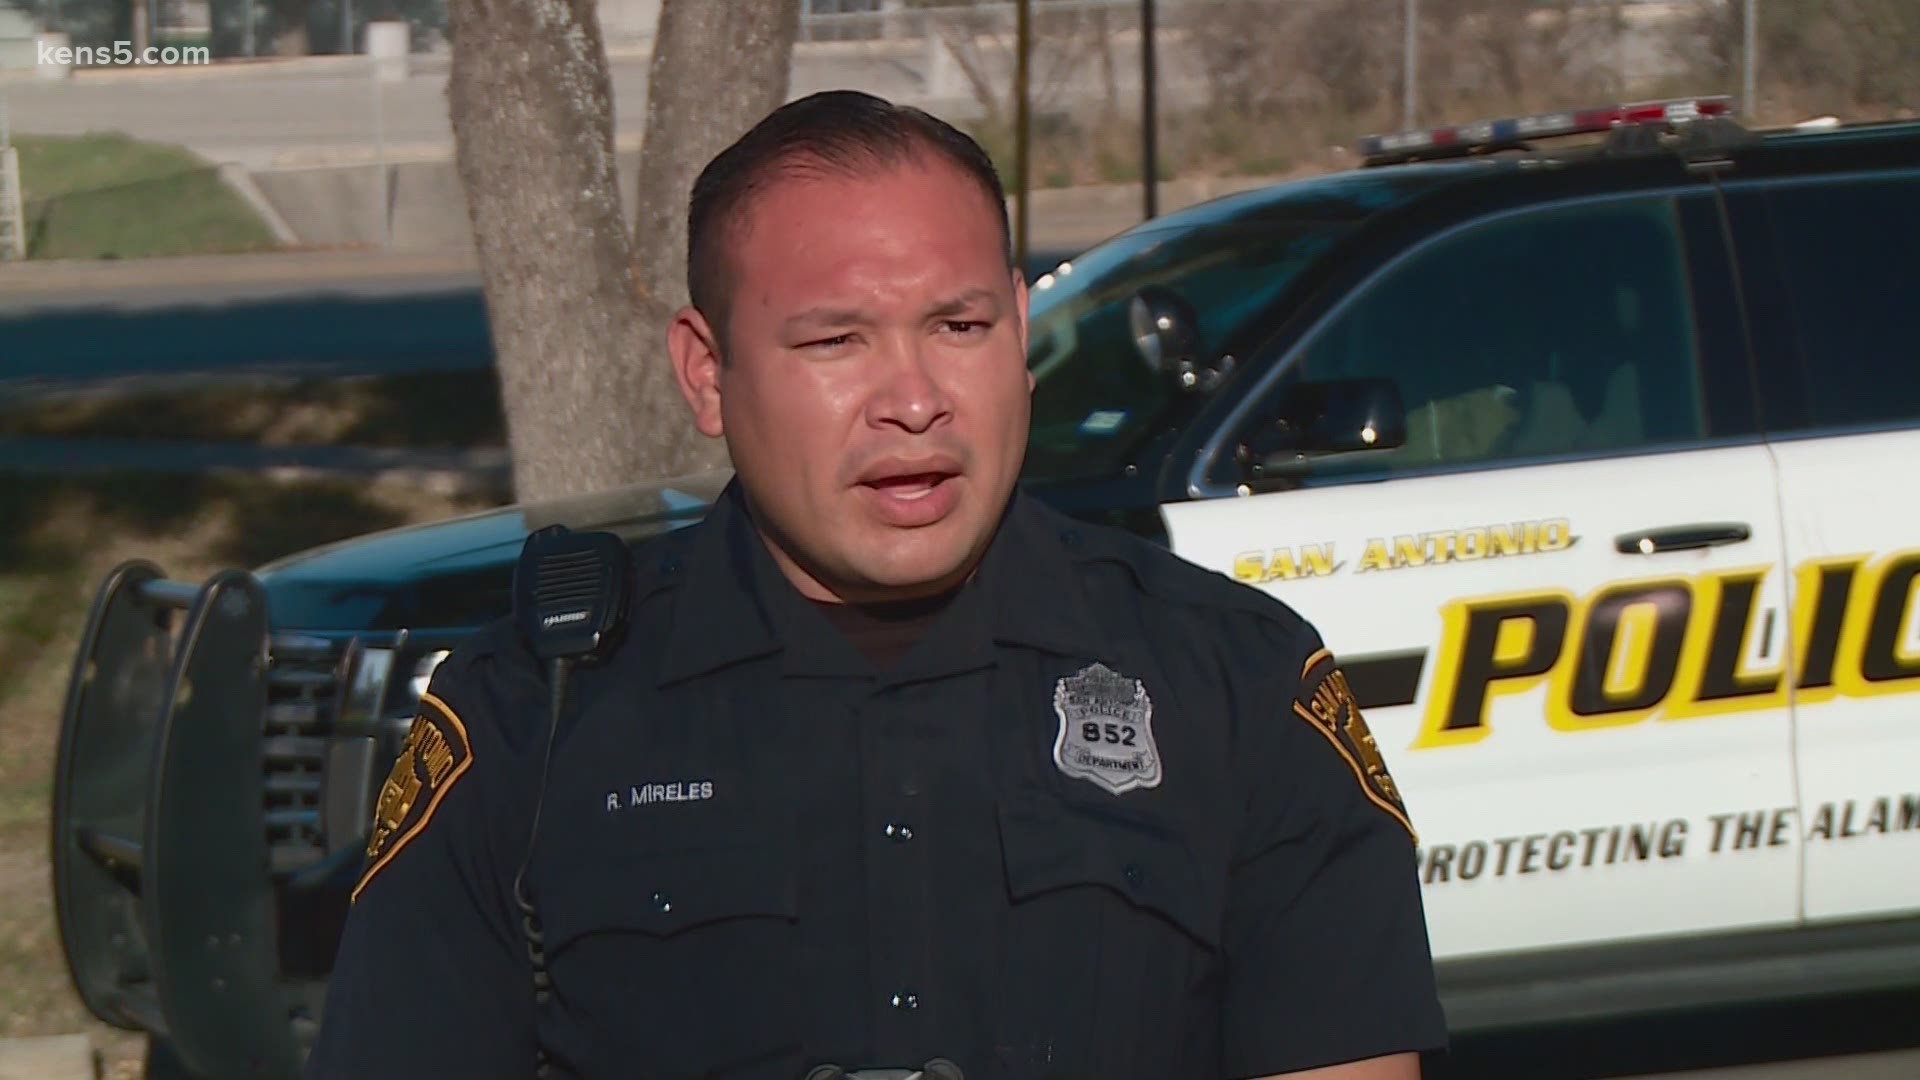 Two officers rushed to help the victims out after a car crash in San Antonio.